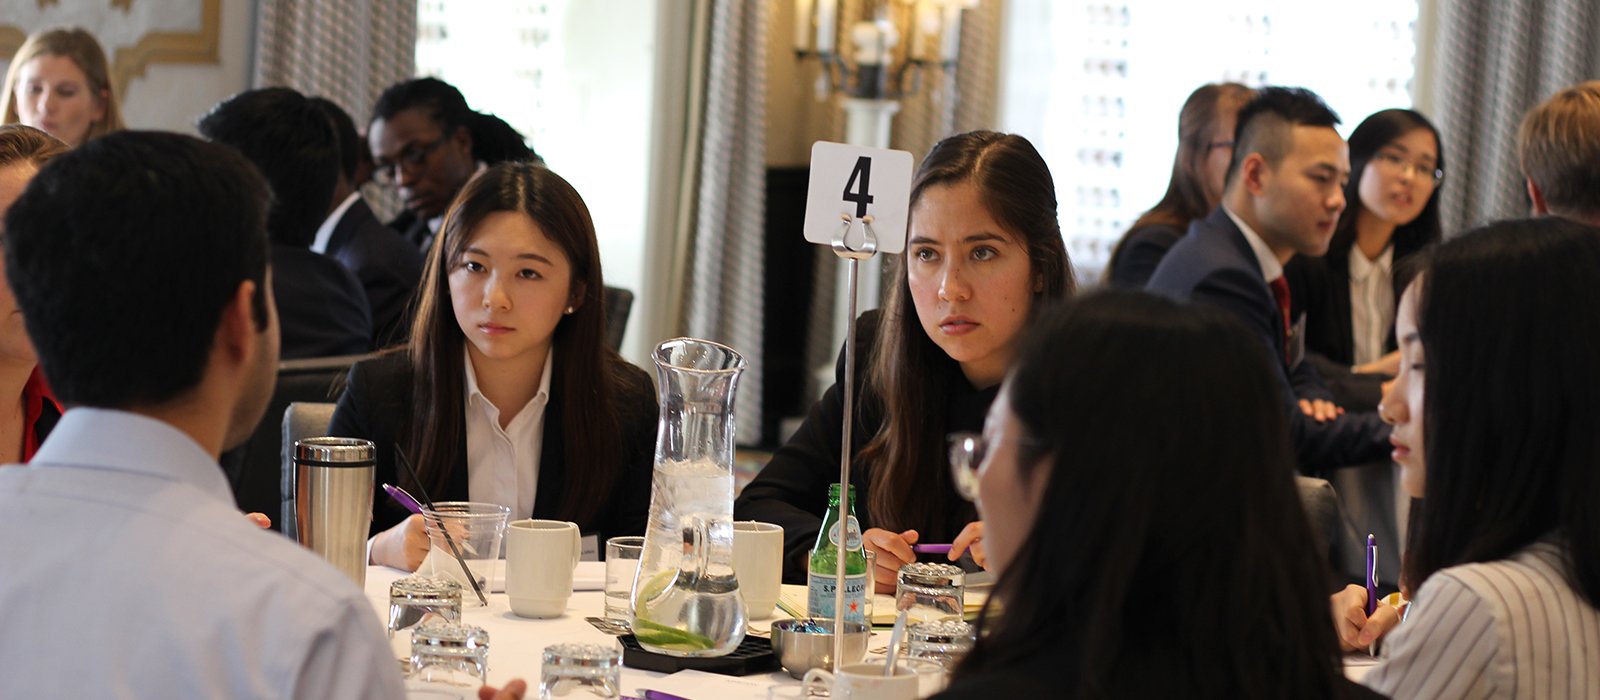 CIPA networking event in DC, students around a table